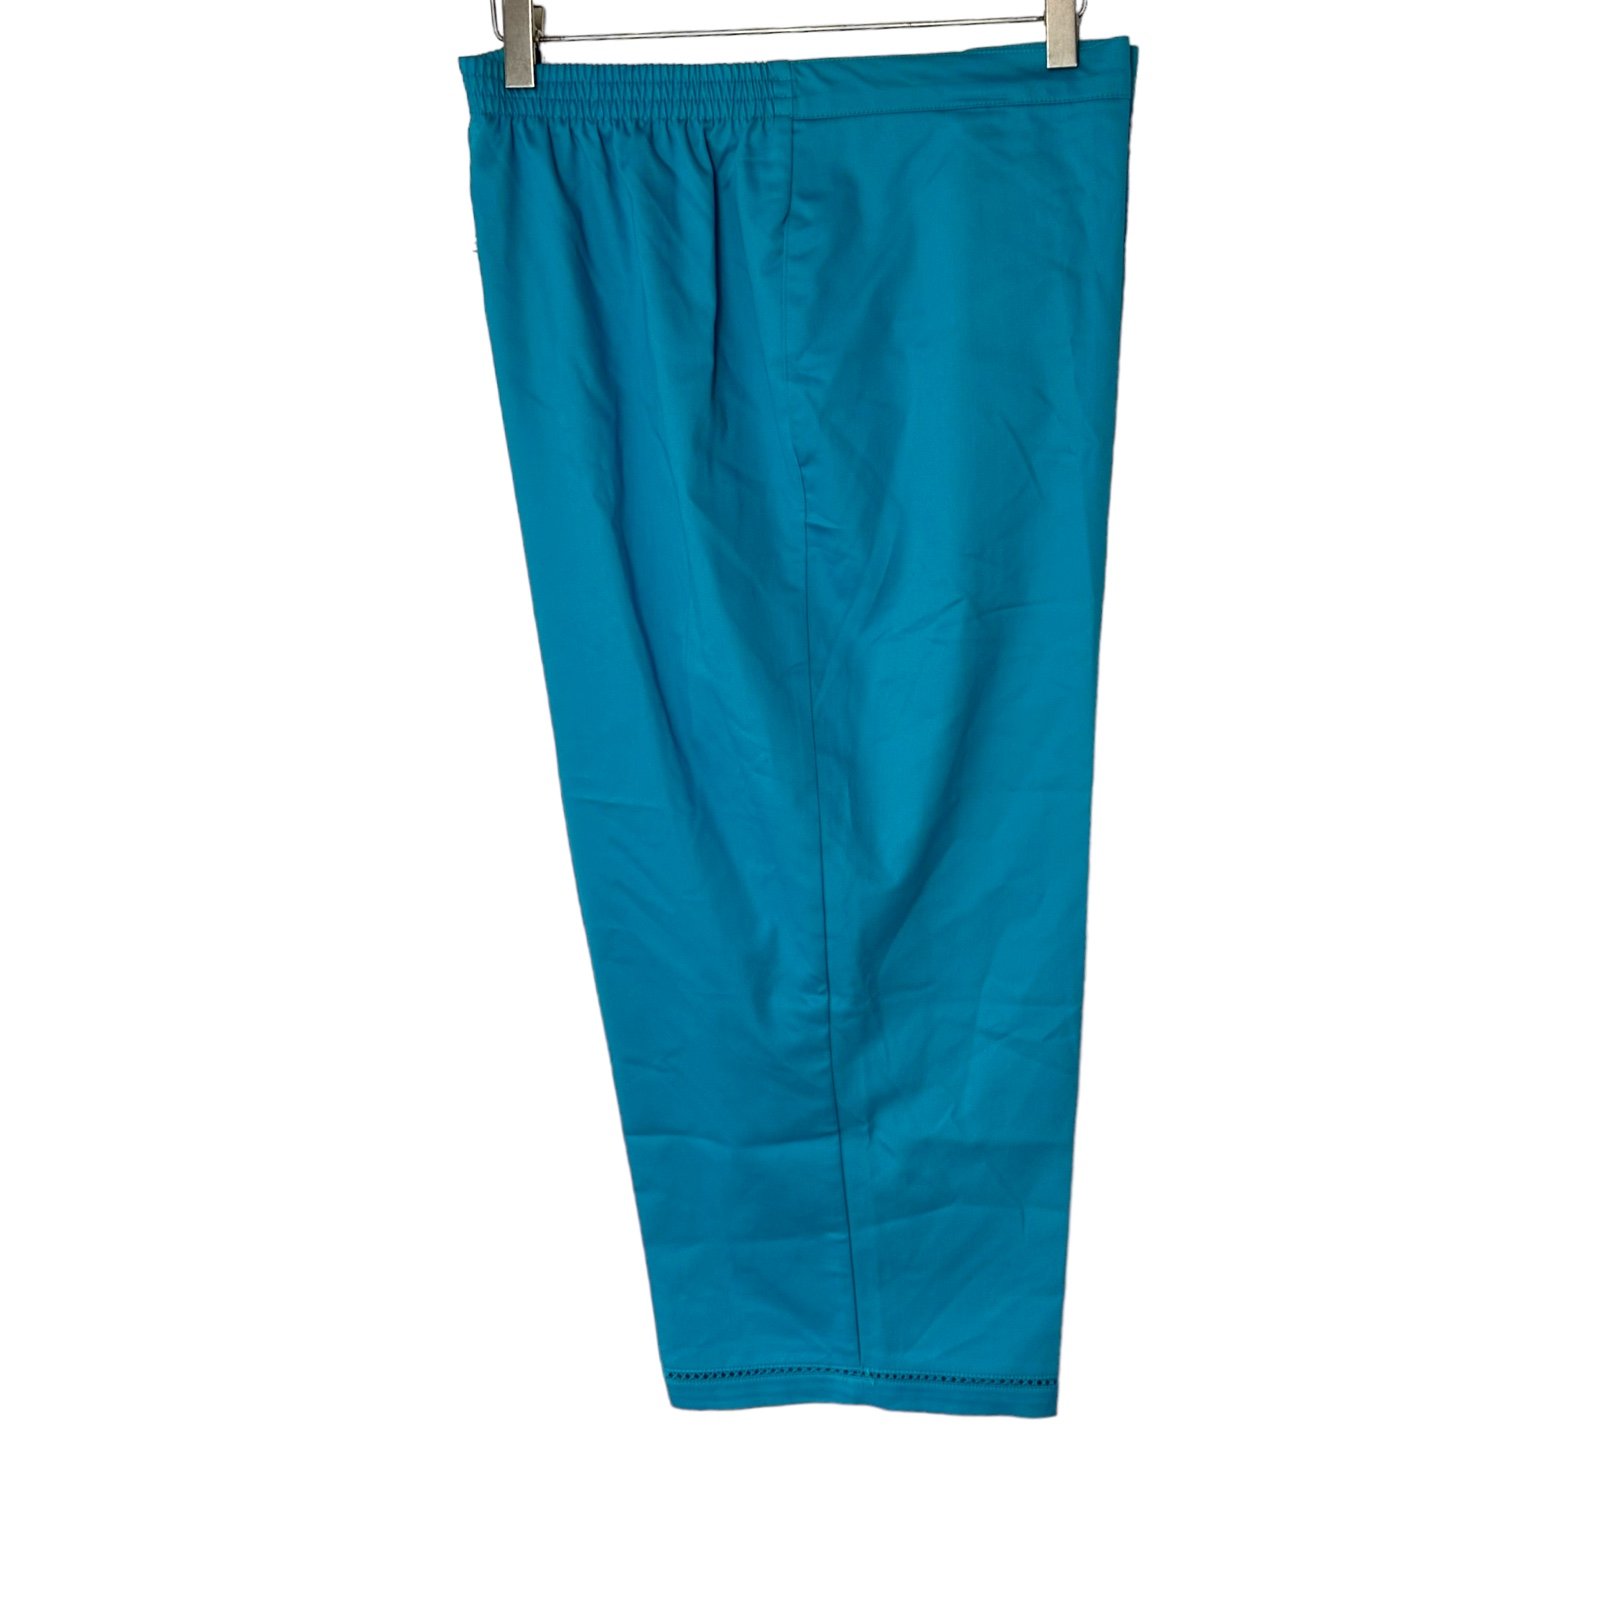 Comfortable Alfred Dunner 20 plus size pull on teal blue capris with pockets JFYhq0TJH Fashion